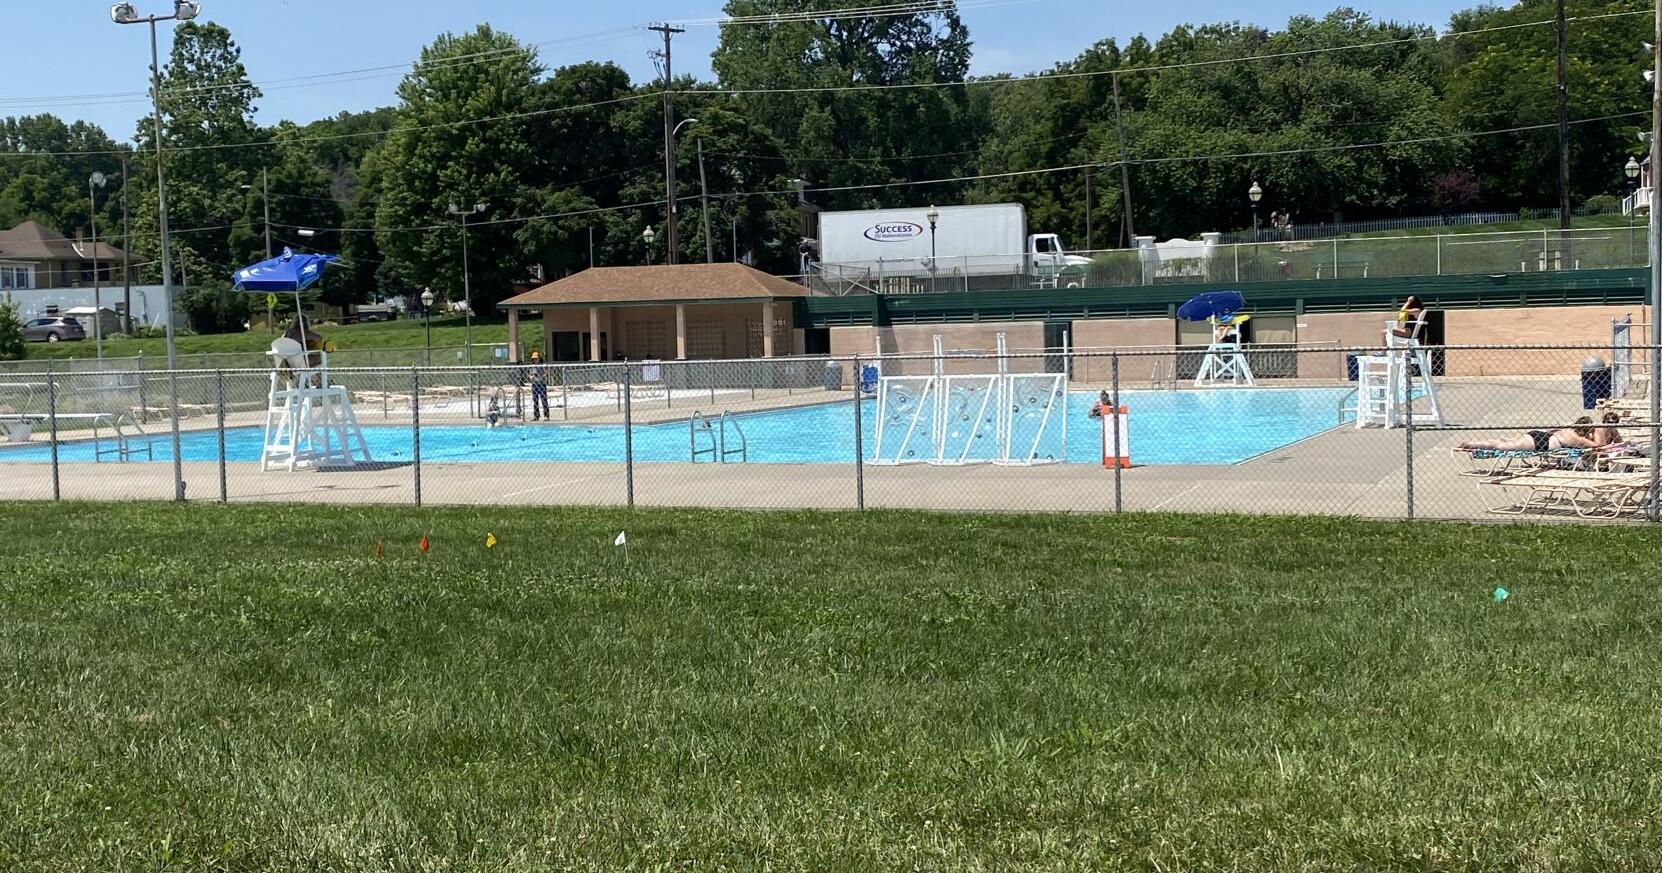 Experts offer safety tips as pools open